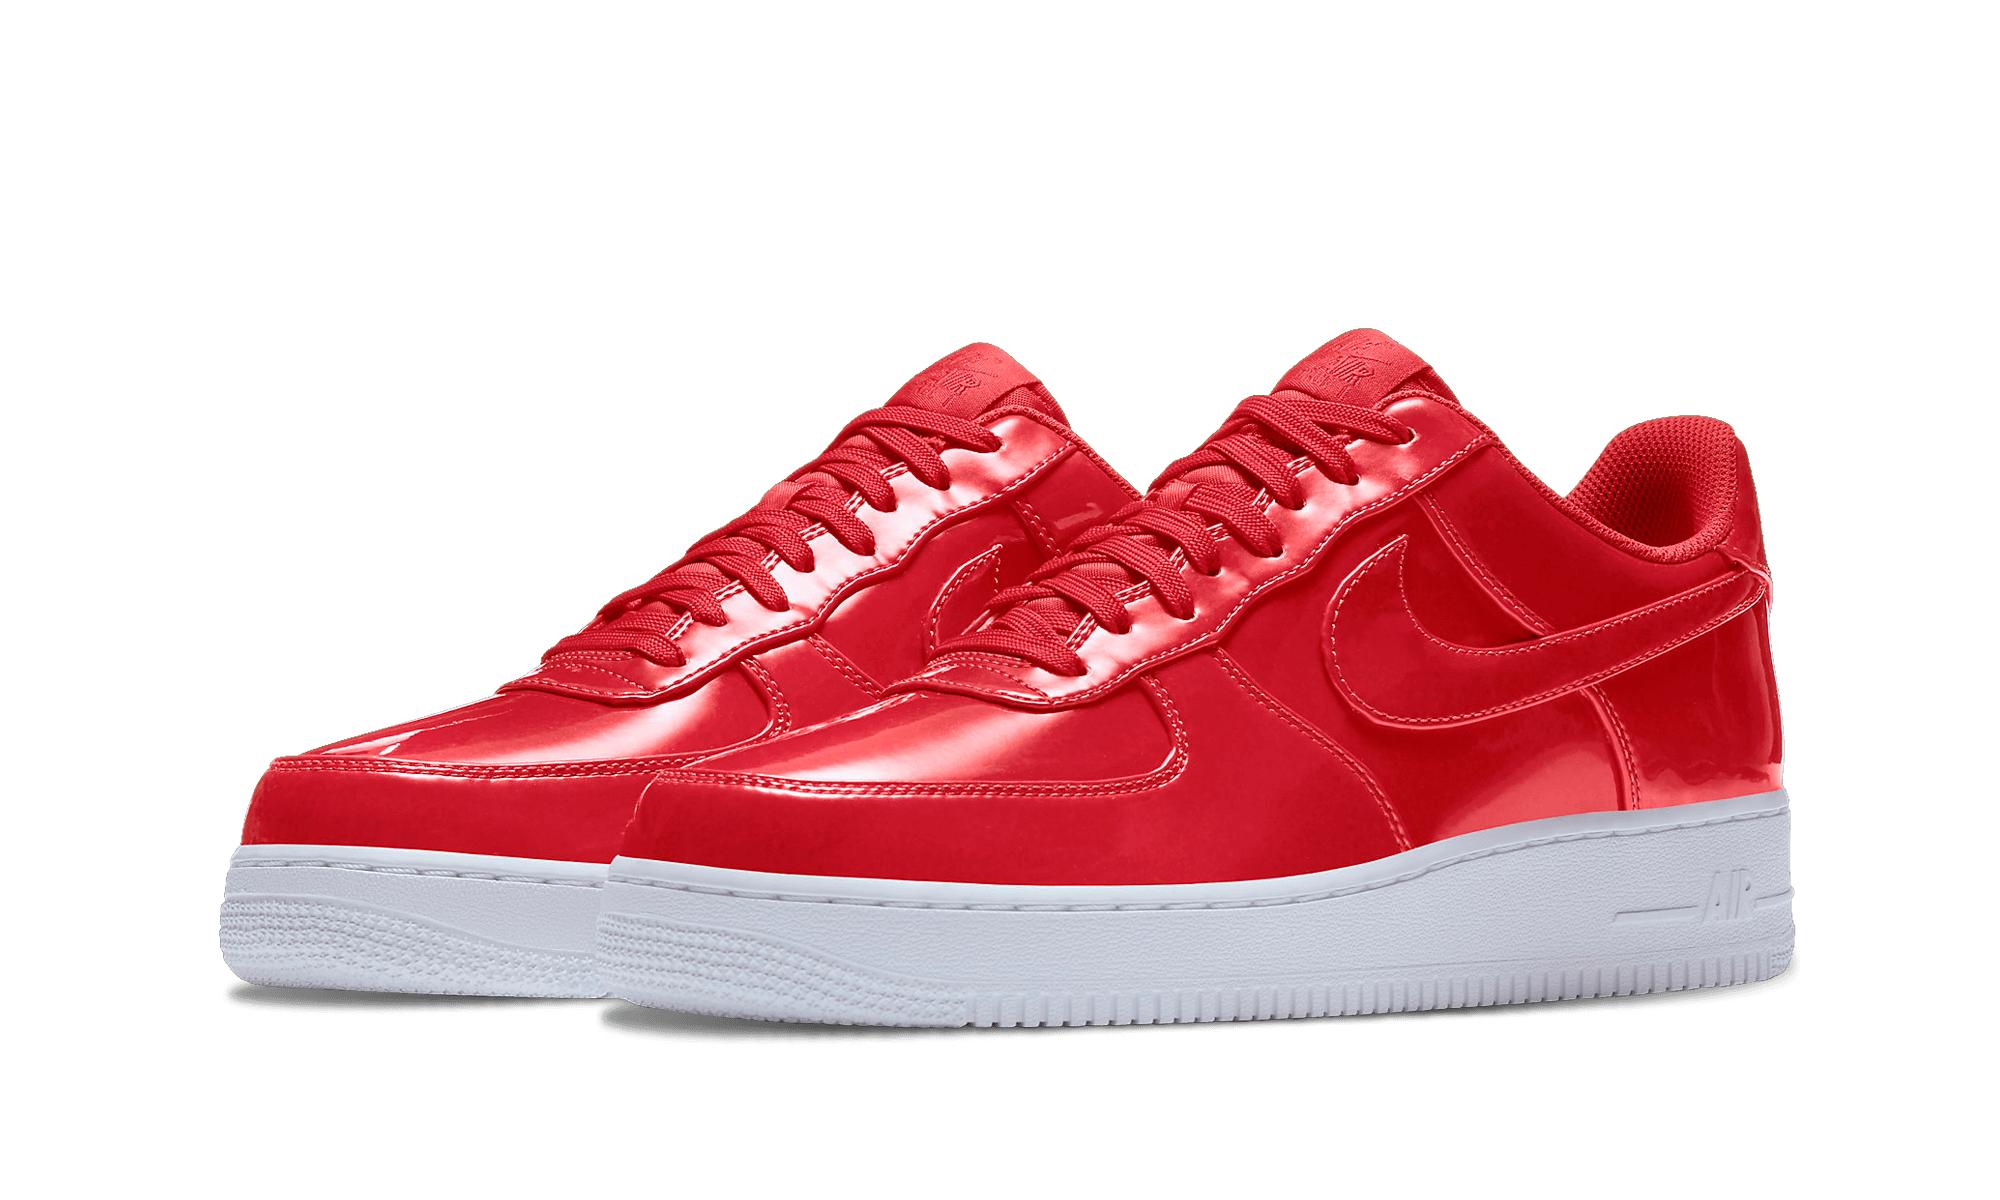 Nike Air Force 1 "07 Lv8 Uv in Red - Lyst